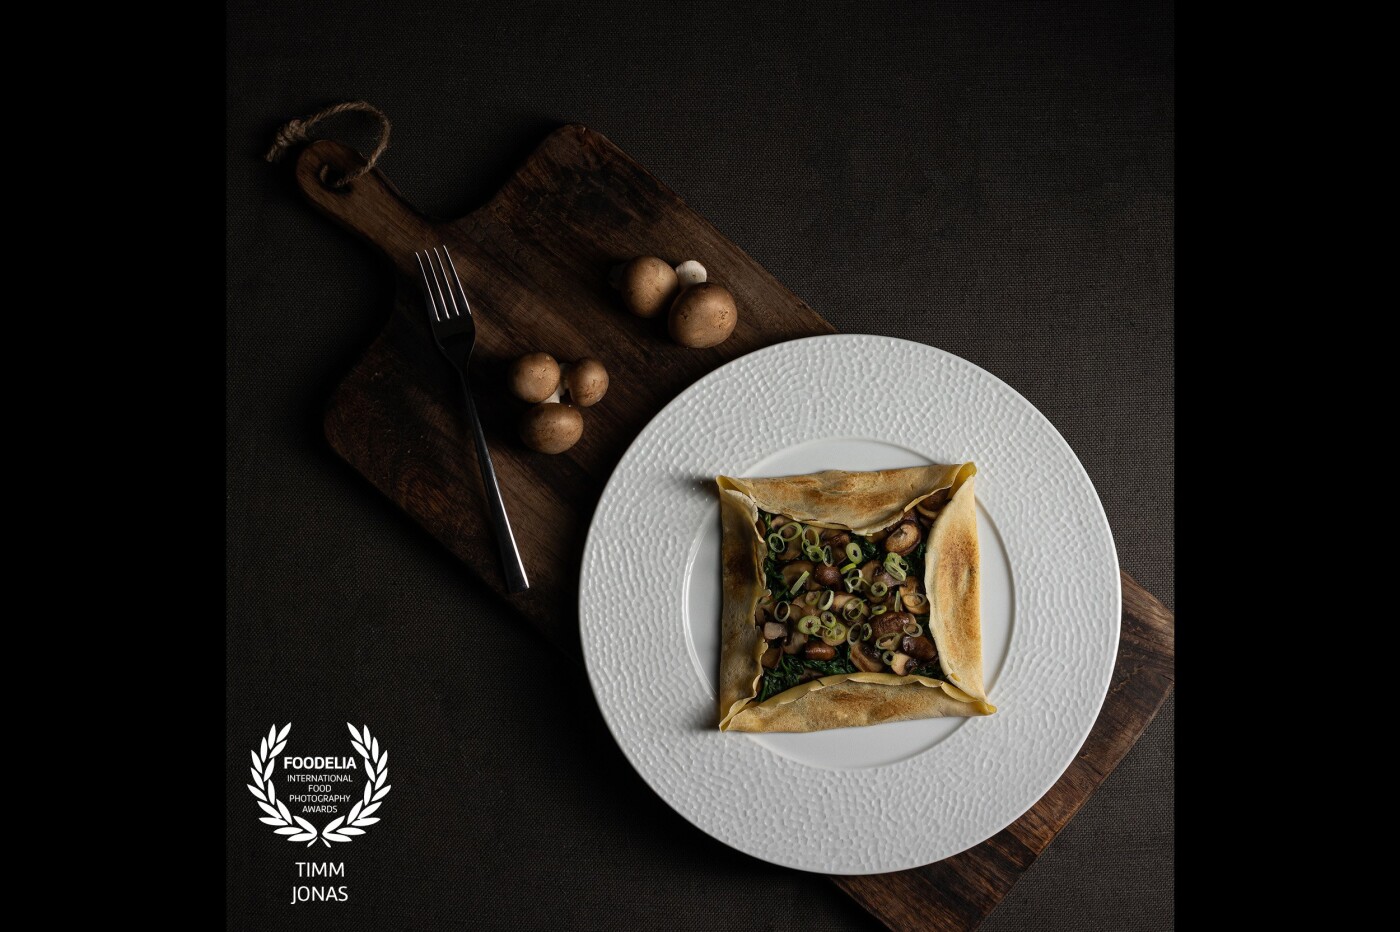 Social media photoshooting for @lusini_de / www.lusini.de for their beautiful plate "Pike".<br />
Dish: Spinach and mushroom galette<br />
30mm lens - F/7.1 - ISO 100